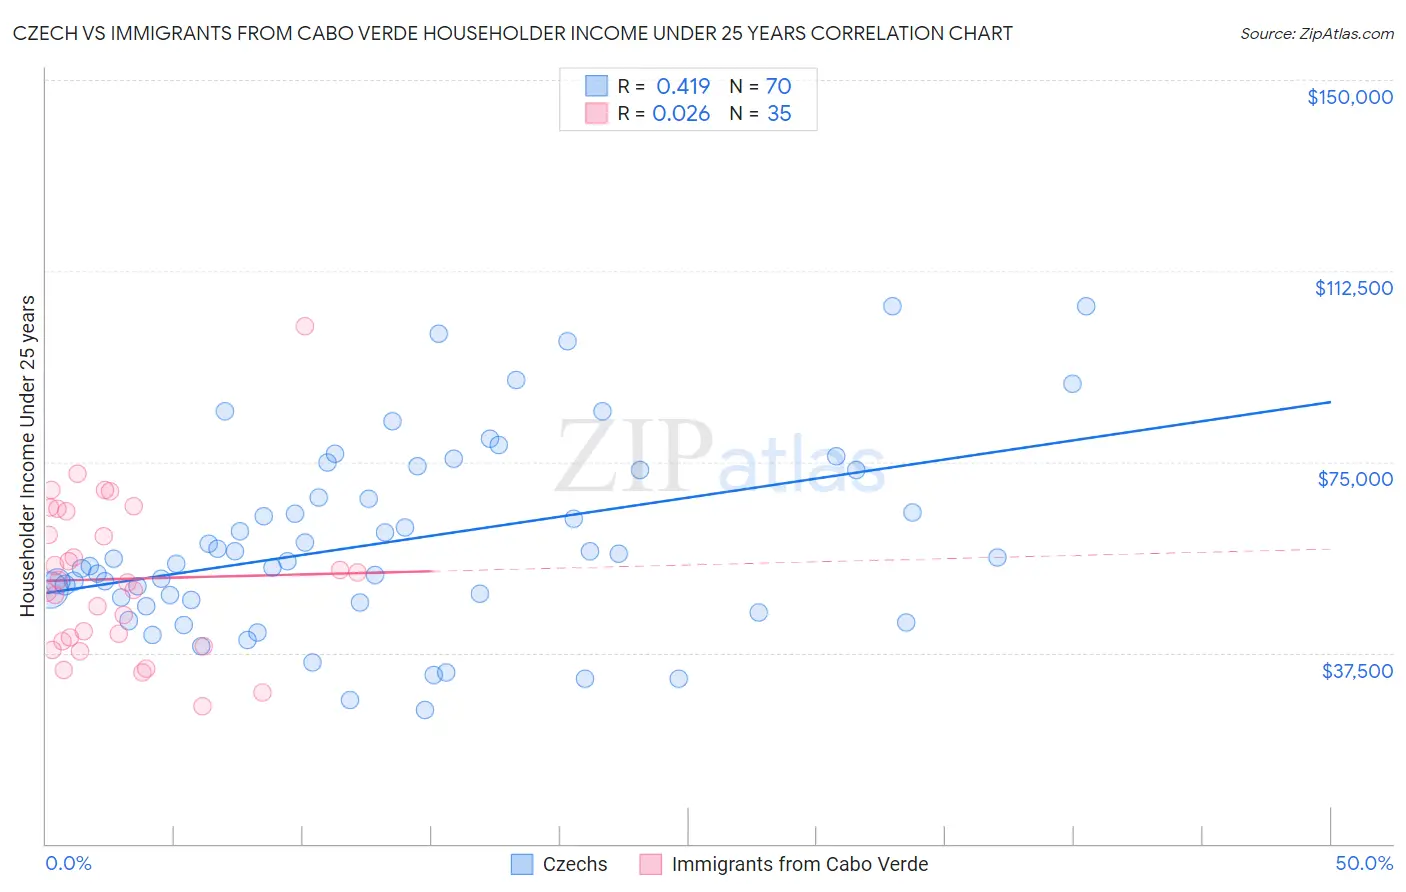 Czech vs Immigrants from Cabo Verde Householder Income Under 25 years